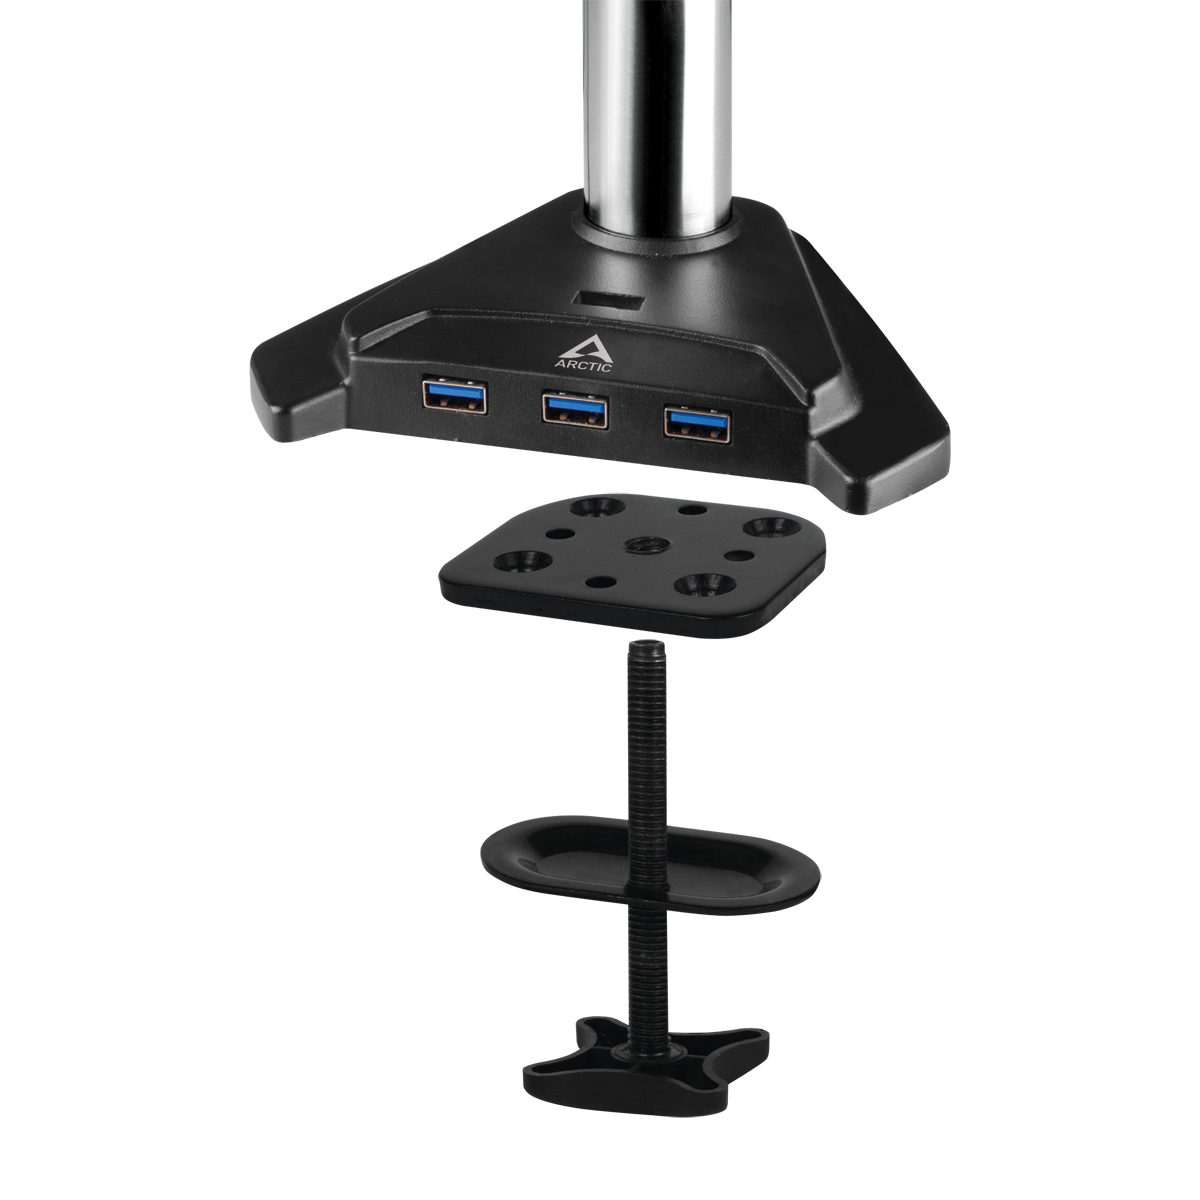 Desk Mount Monitor Arm with SuperSpeed USB Hub ARCTIC Z1 Pro (Gen 3) Detail View Table Clamp Individual Parts